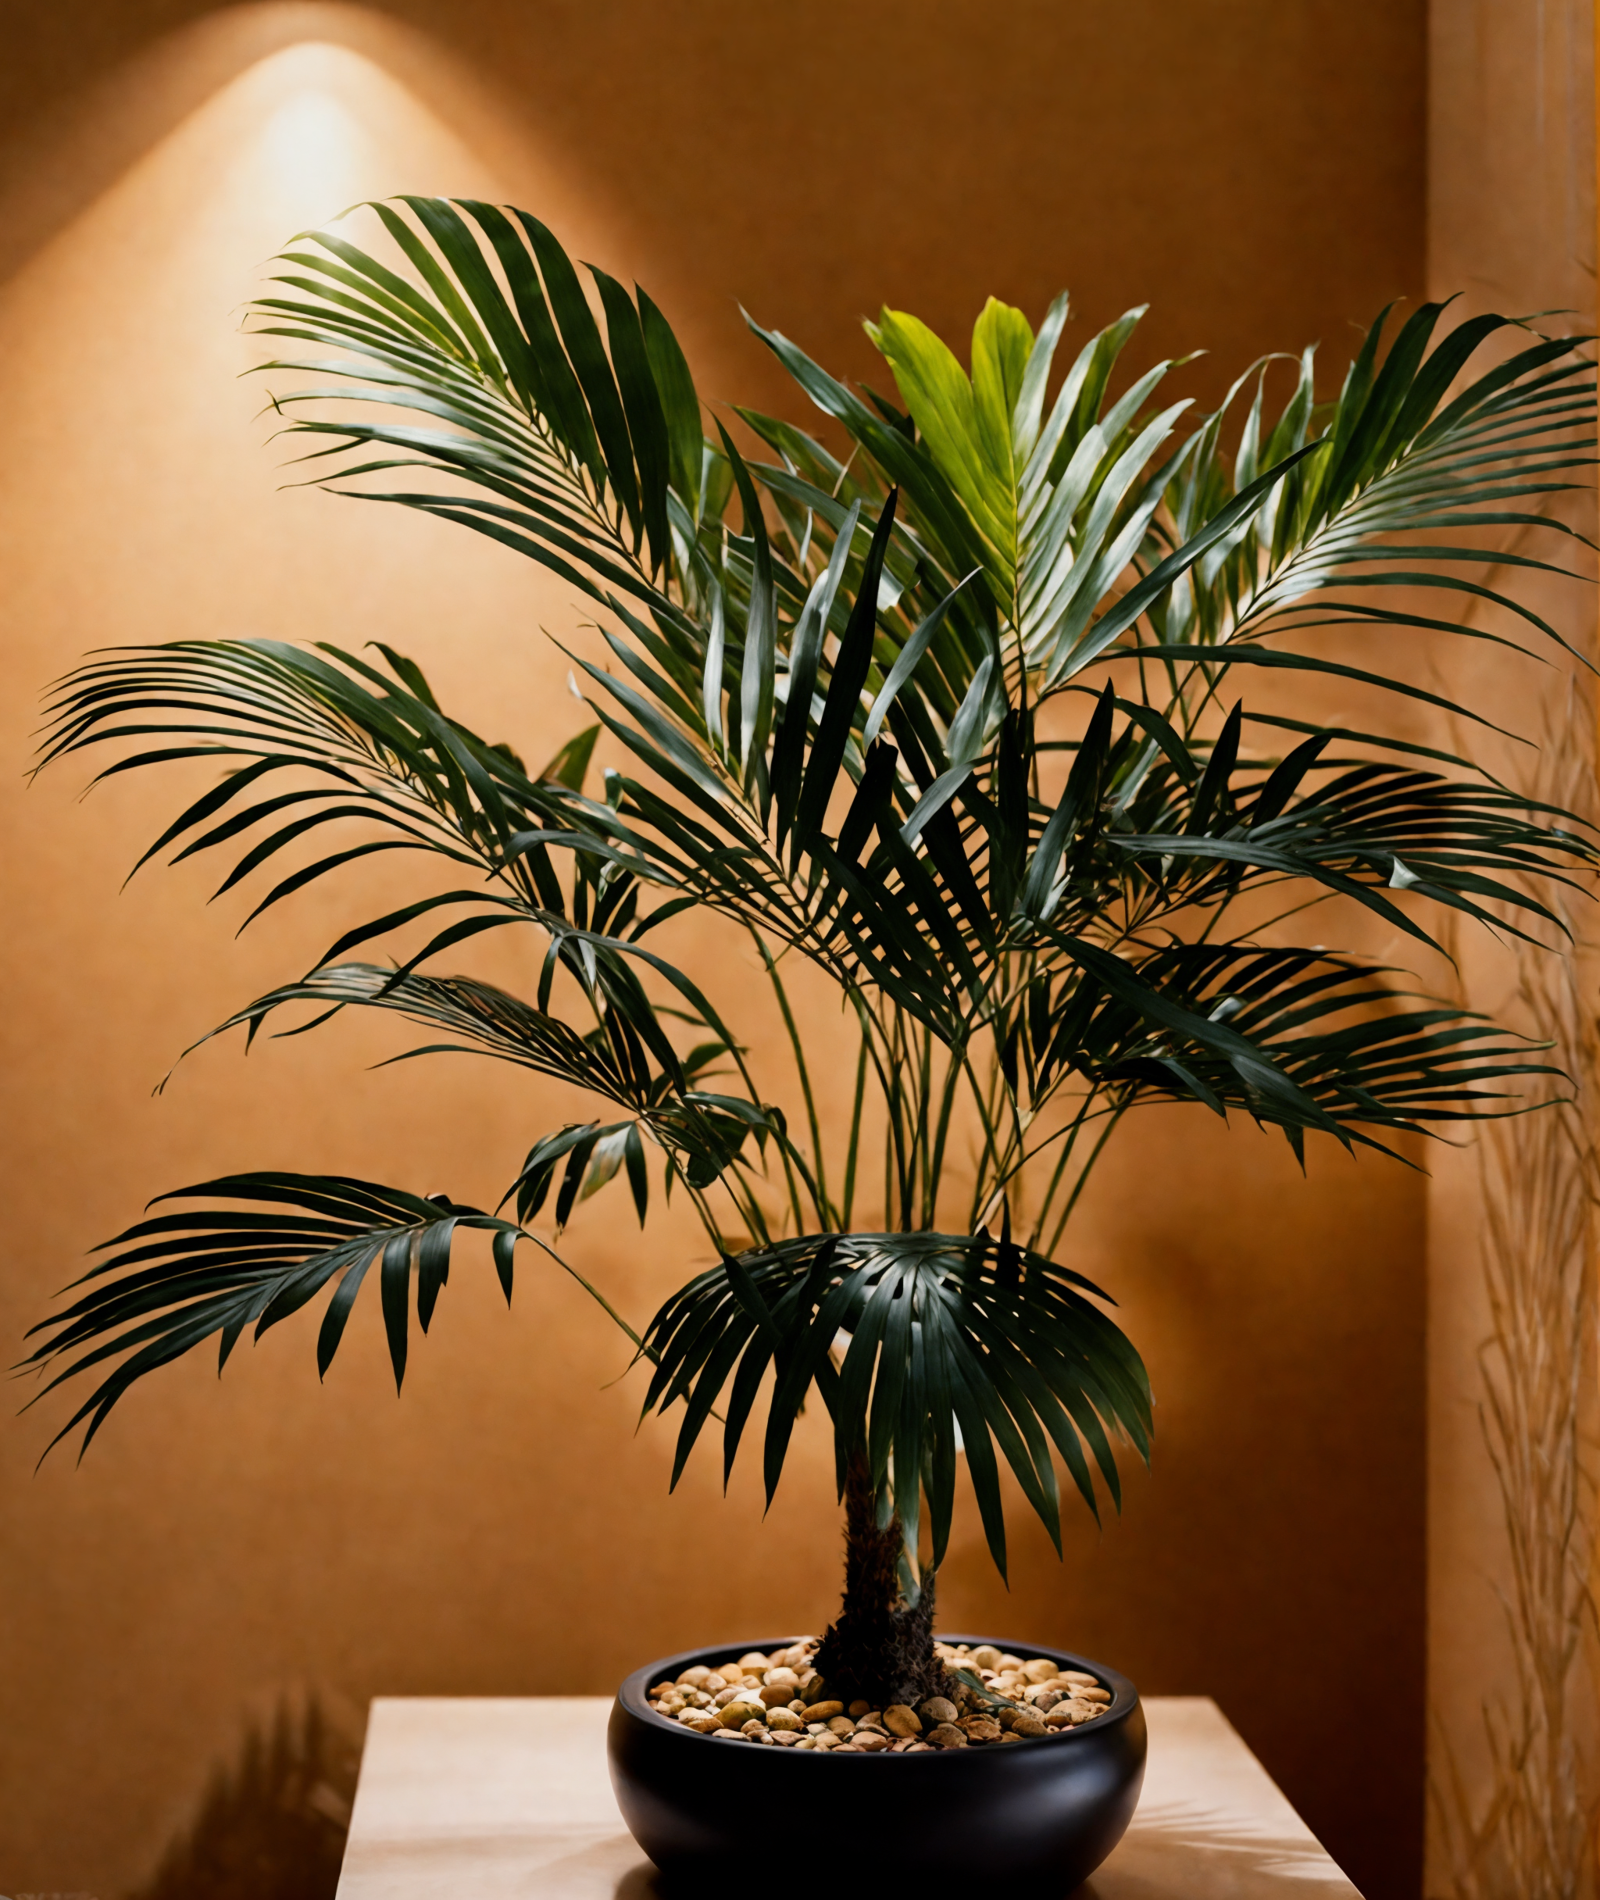 Howea forsteriana in a planter on a table, with clear lighting and a dark background, as part of indoor decor.